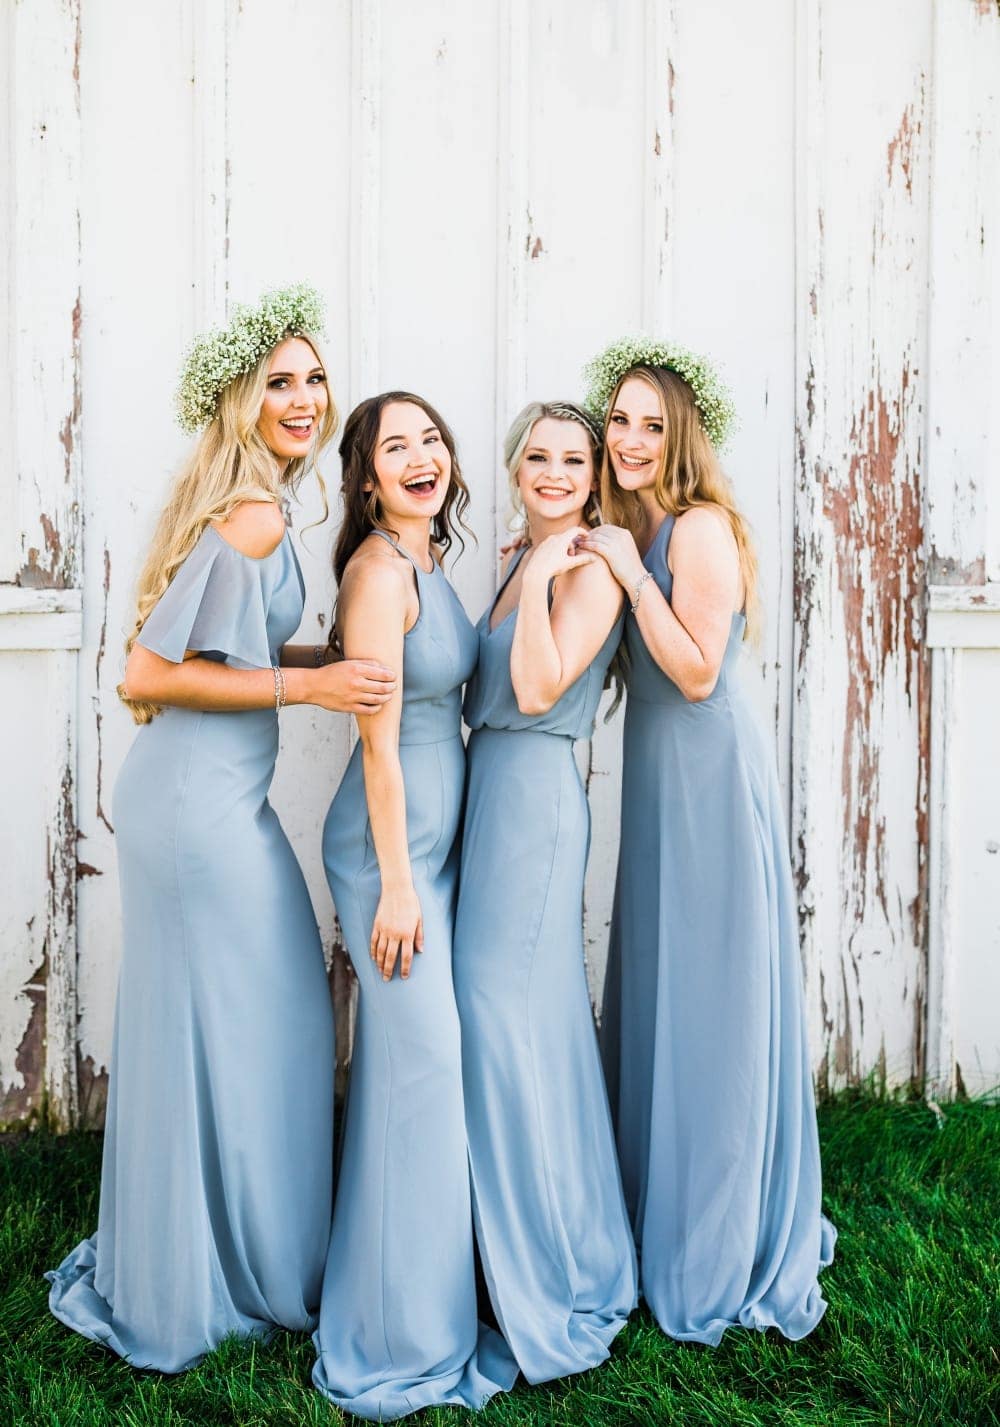 Cheap Bridesmaid Dresses: 30 Best High Street Bridesmaid Dresses -  hitched.co.uk